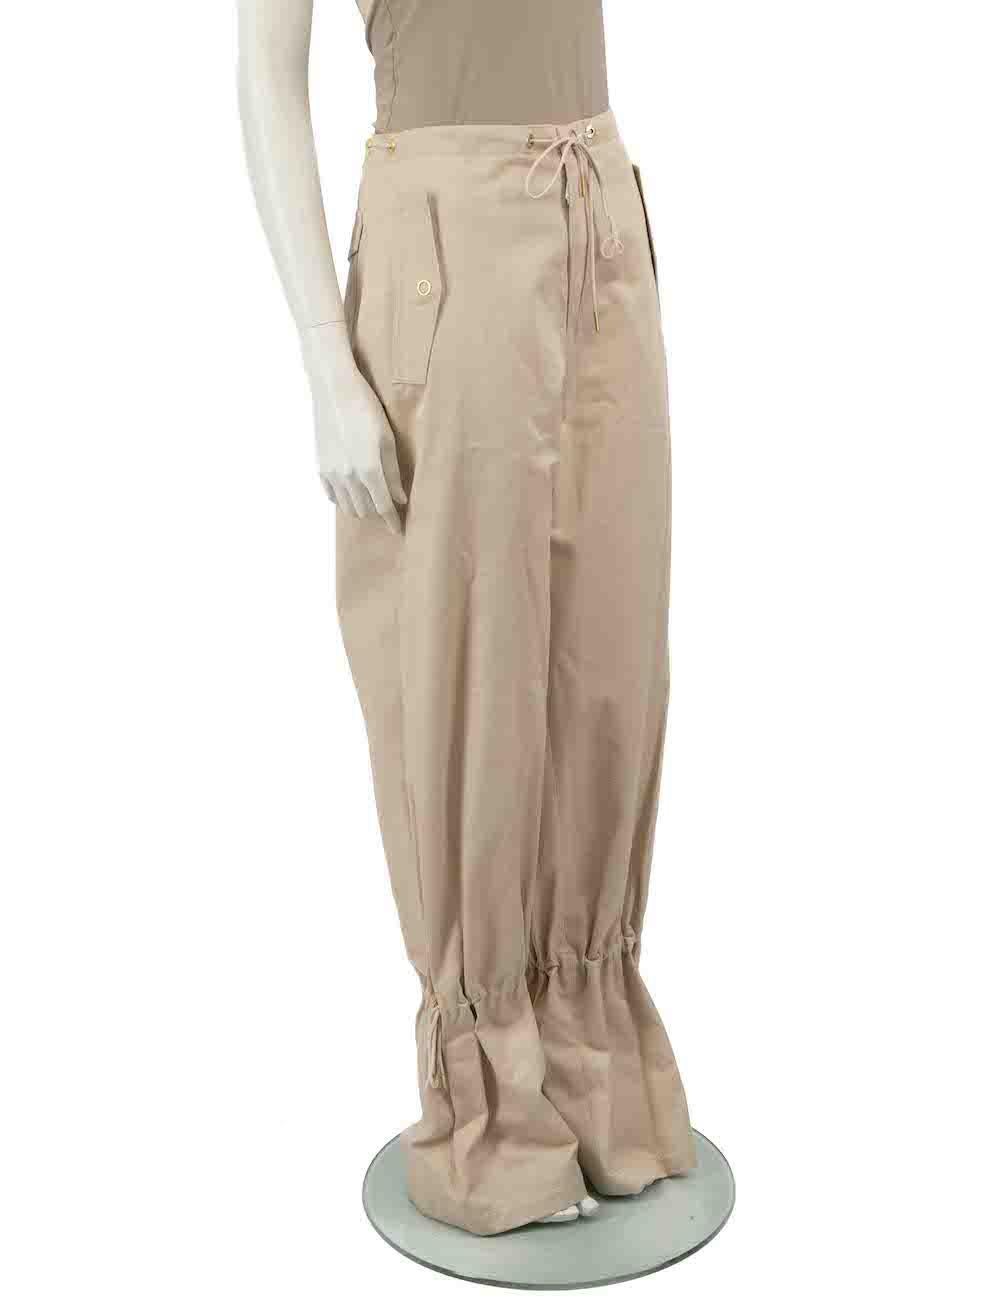 CONDITION is Never worn, with tags. No visible wear to trousers is evident on this new Dion Lee designer resale item.
 
 
 
 Details
 
 
 Beige
 
 Cotton
 
 Trousers
 
 Wide leg
 
 High rise
 
 Drawstring waist and leg cuffs
 
 2x Side pockets
 
 1x